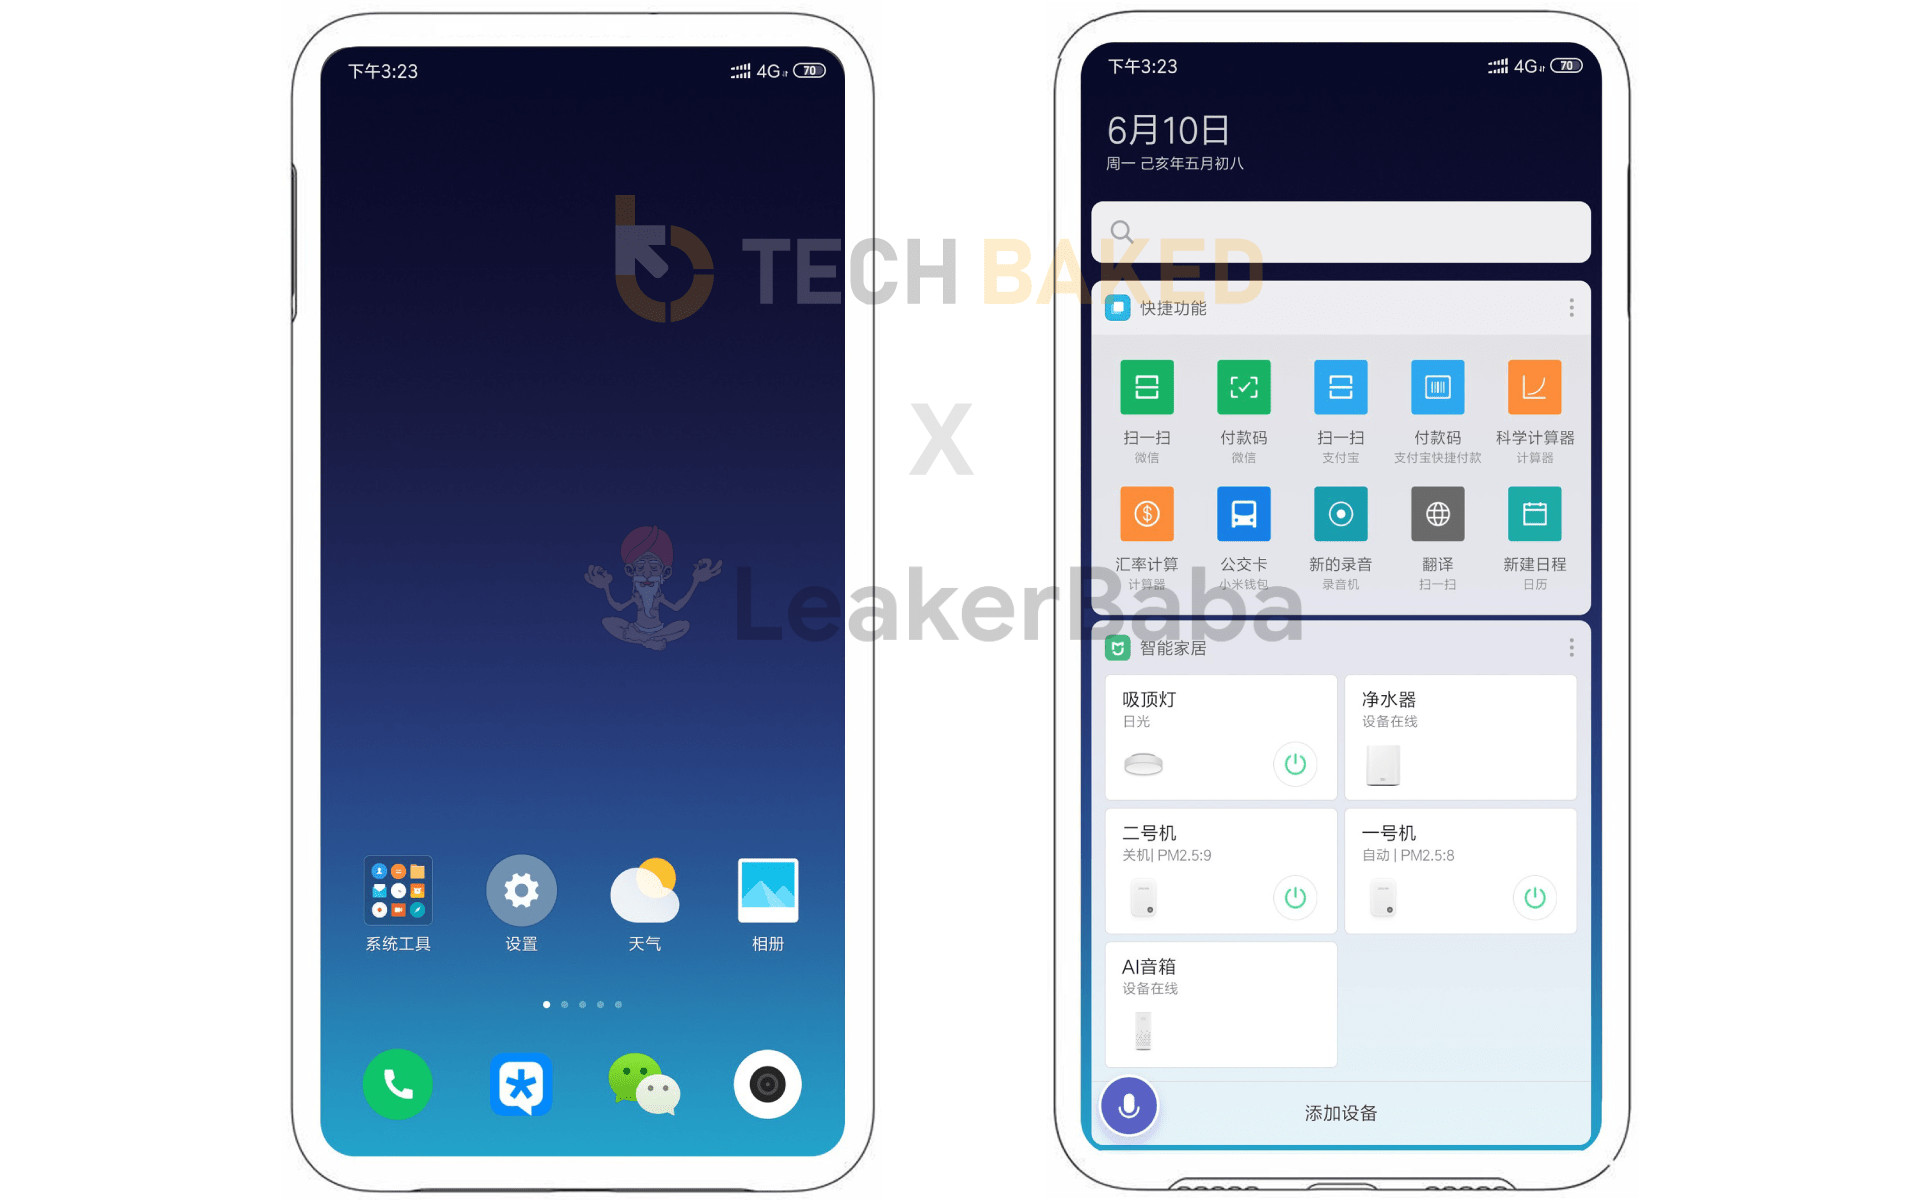 Xiaomi In-Display Camera Patent - (TechBaked x LeakerBaba)